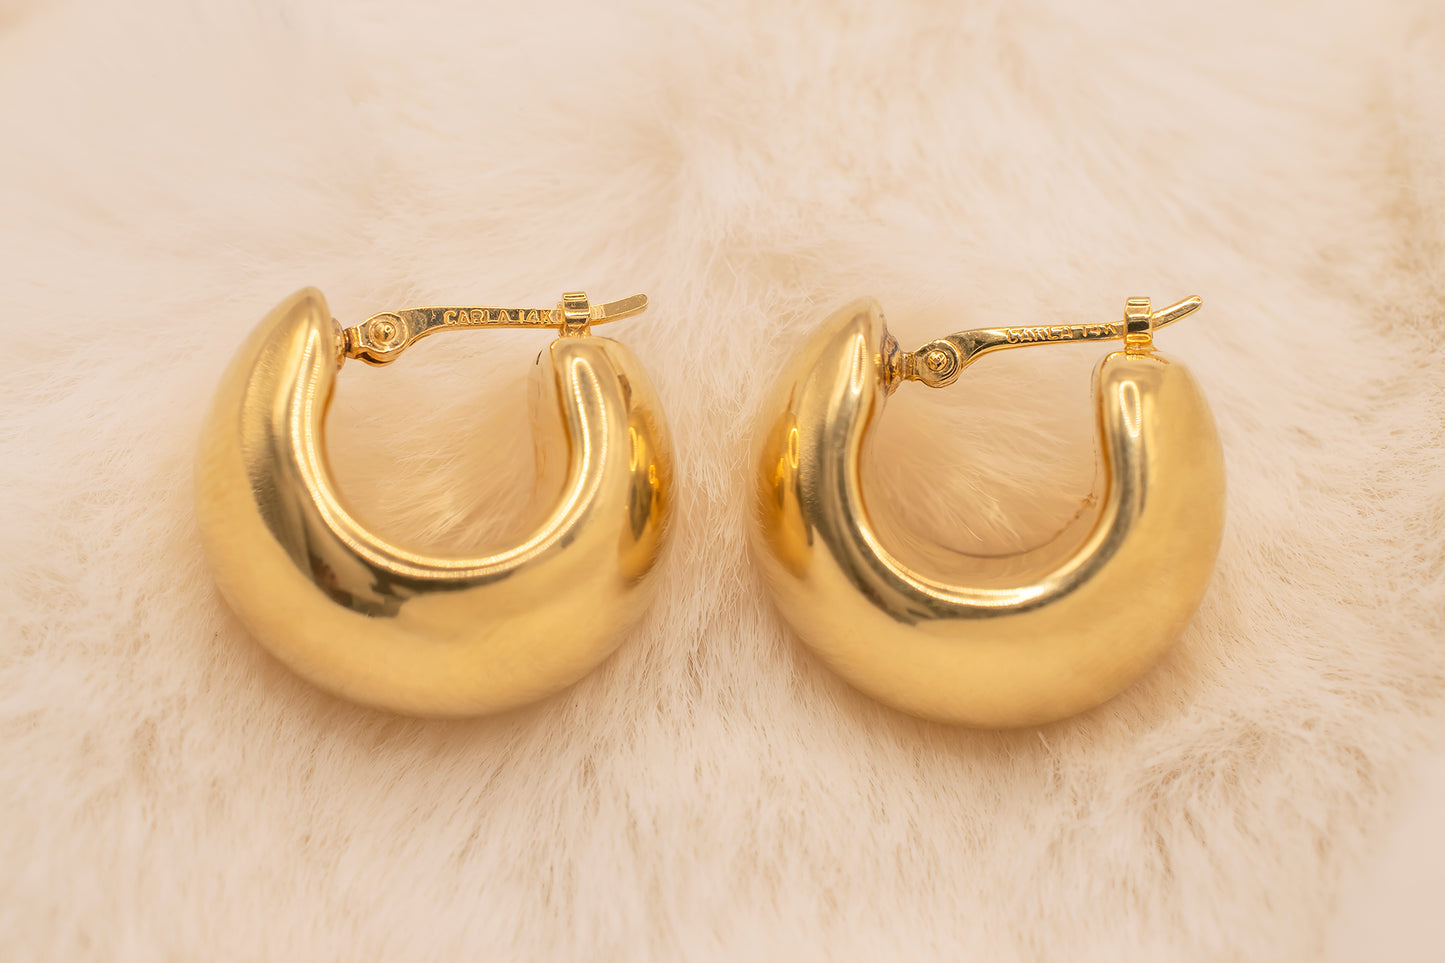 Vintage 14K Yellow Gold High Polish Wide Dome Contemporary Style Hoop Earrings